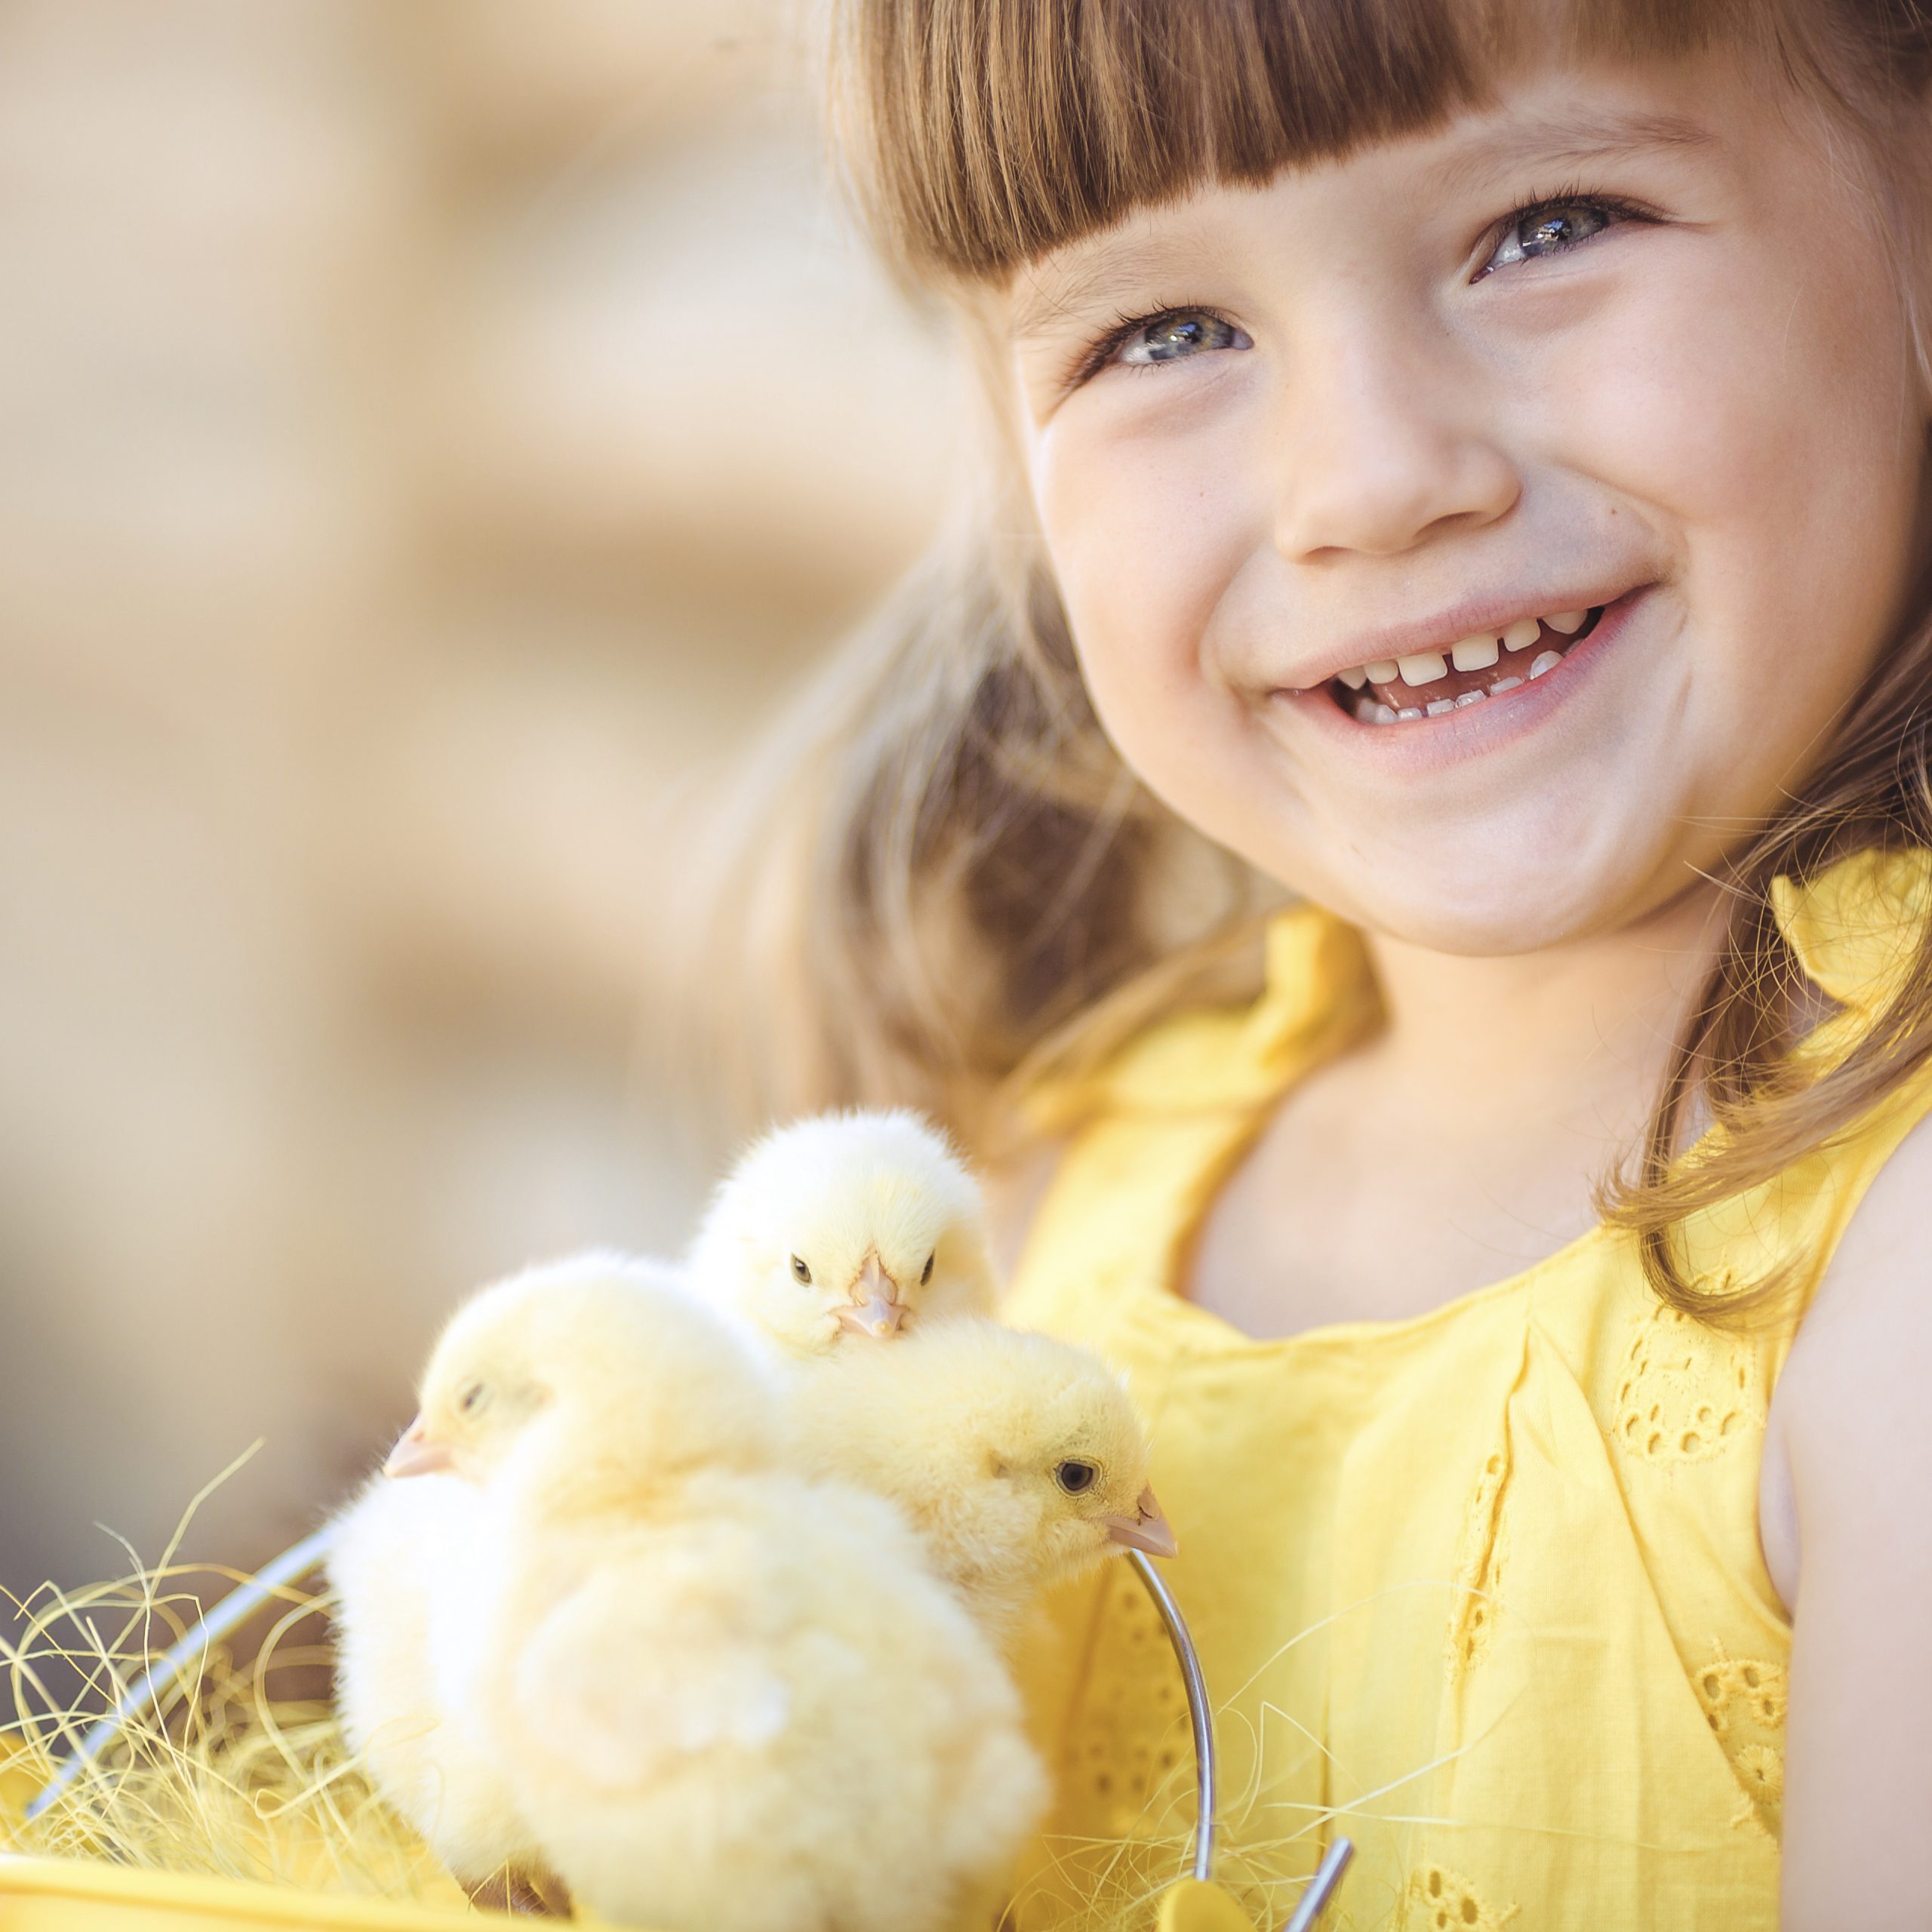 Little girl farmer sits near a wooden fence with a yellow bucket of straw and feeds a cheerful brood of little yellow chickens at a summer cottage in a village on a sunny summer day. Happy child with little fluffy yellow chickens.